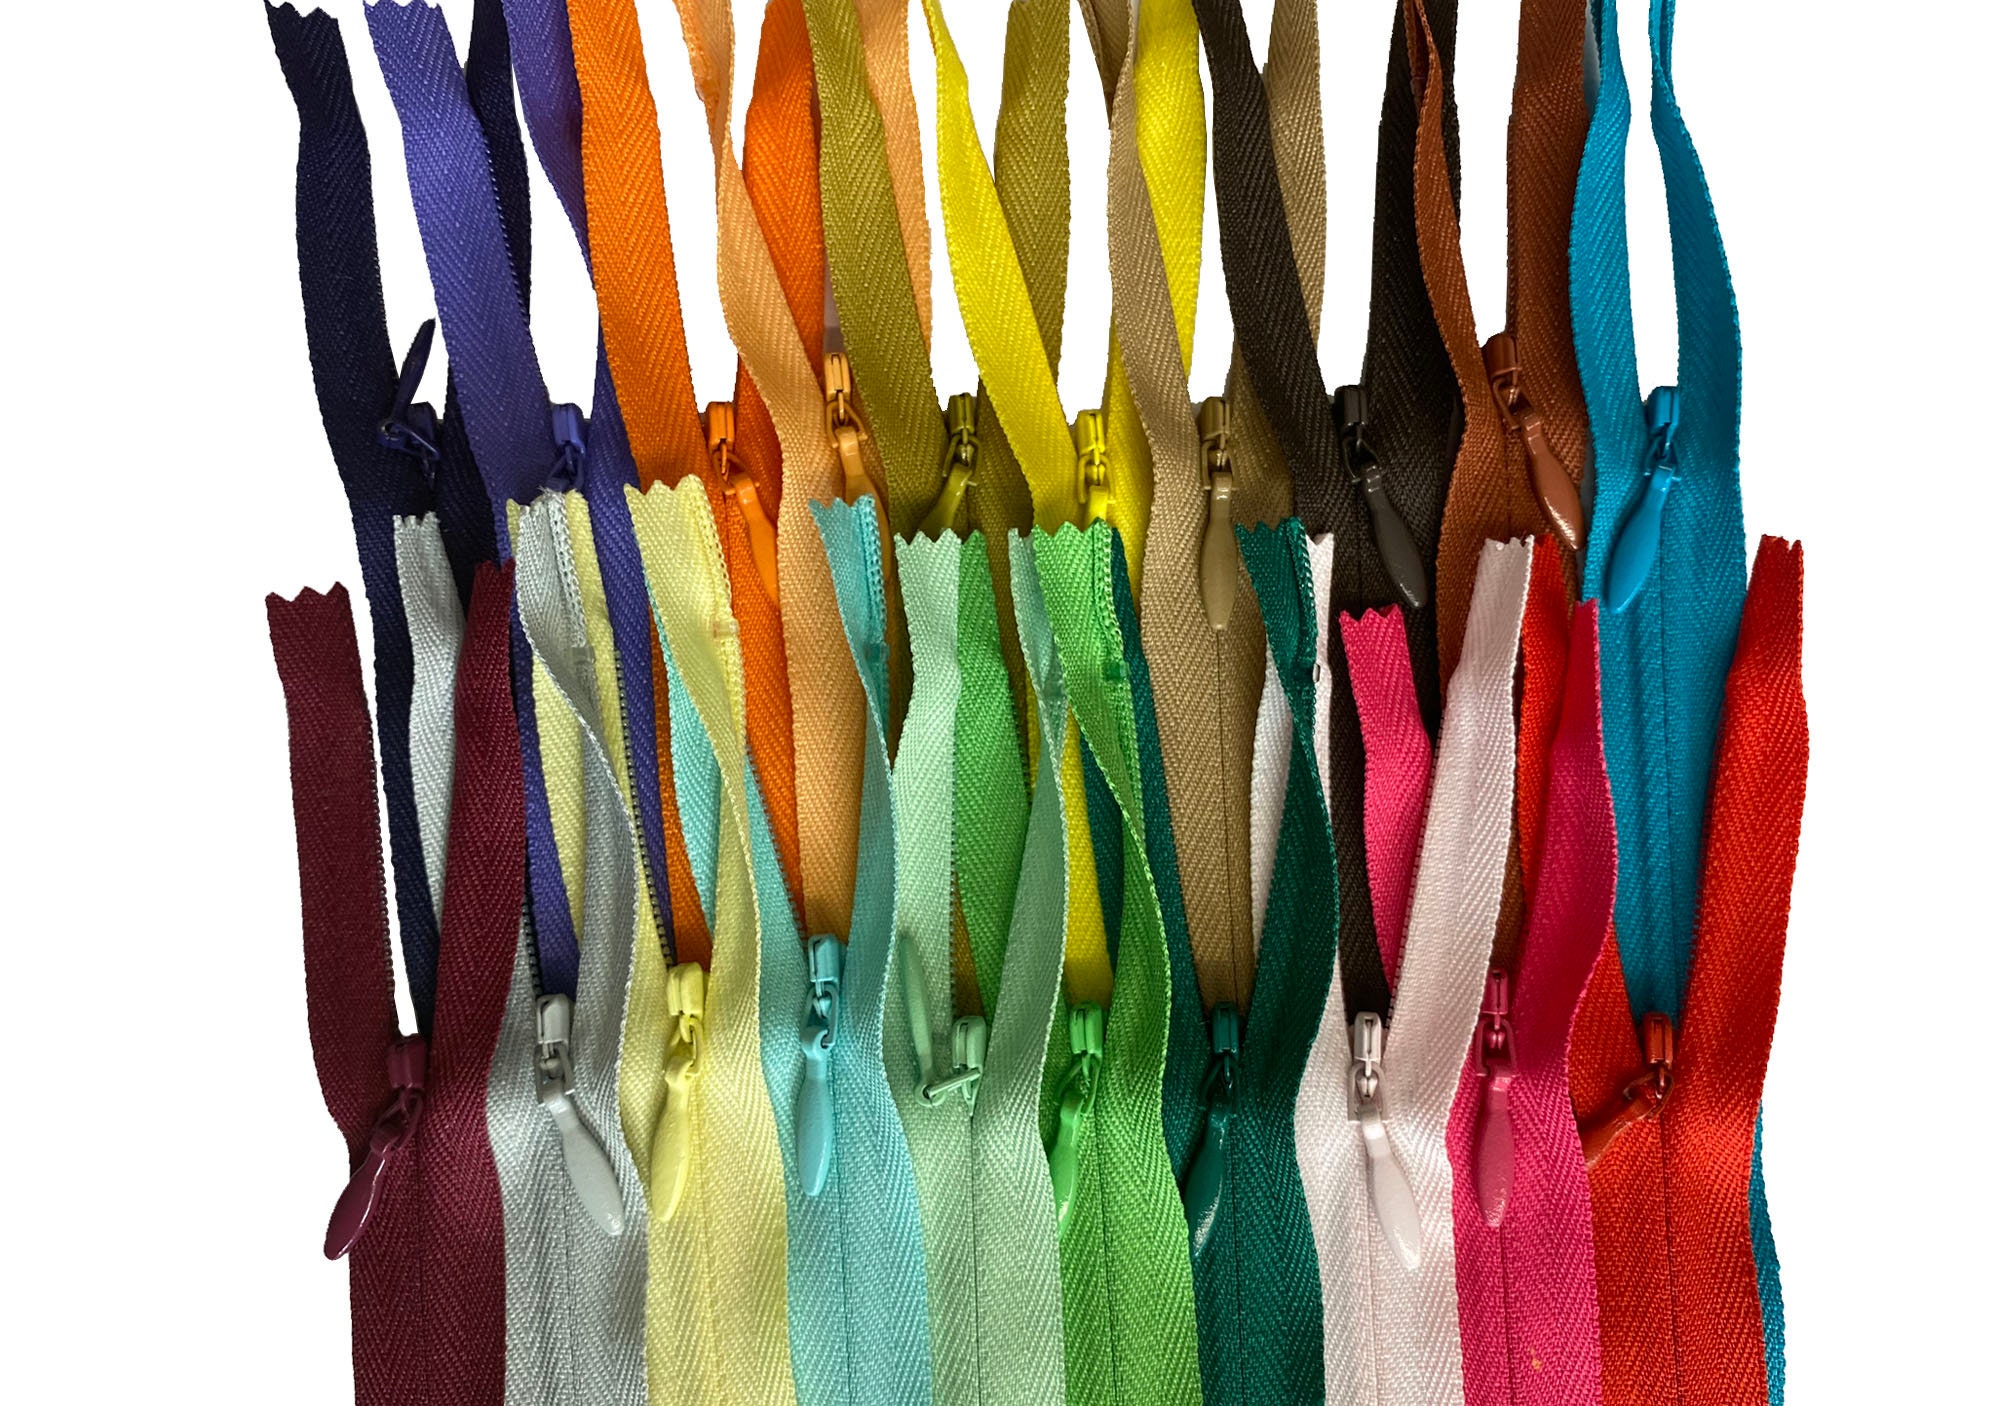 10 Meters Zipper by the Yard with Mult Color Zippers Sliders 20pcs - for  Bag,Clothes and Tailor Sewing Crafts